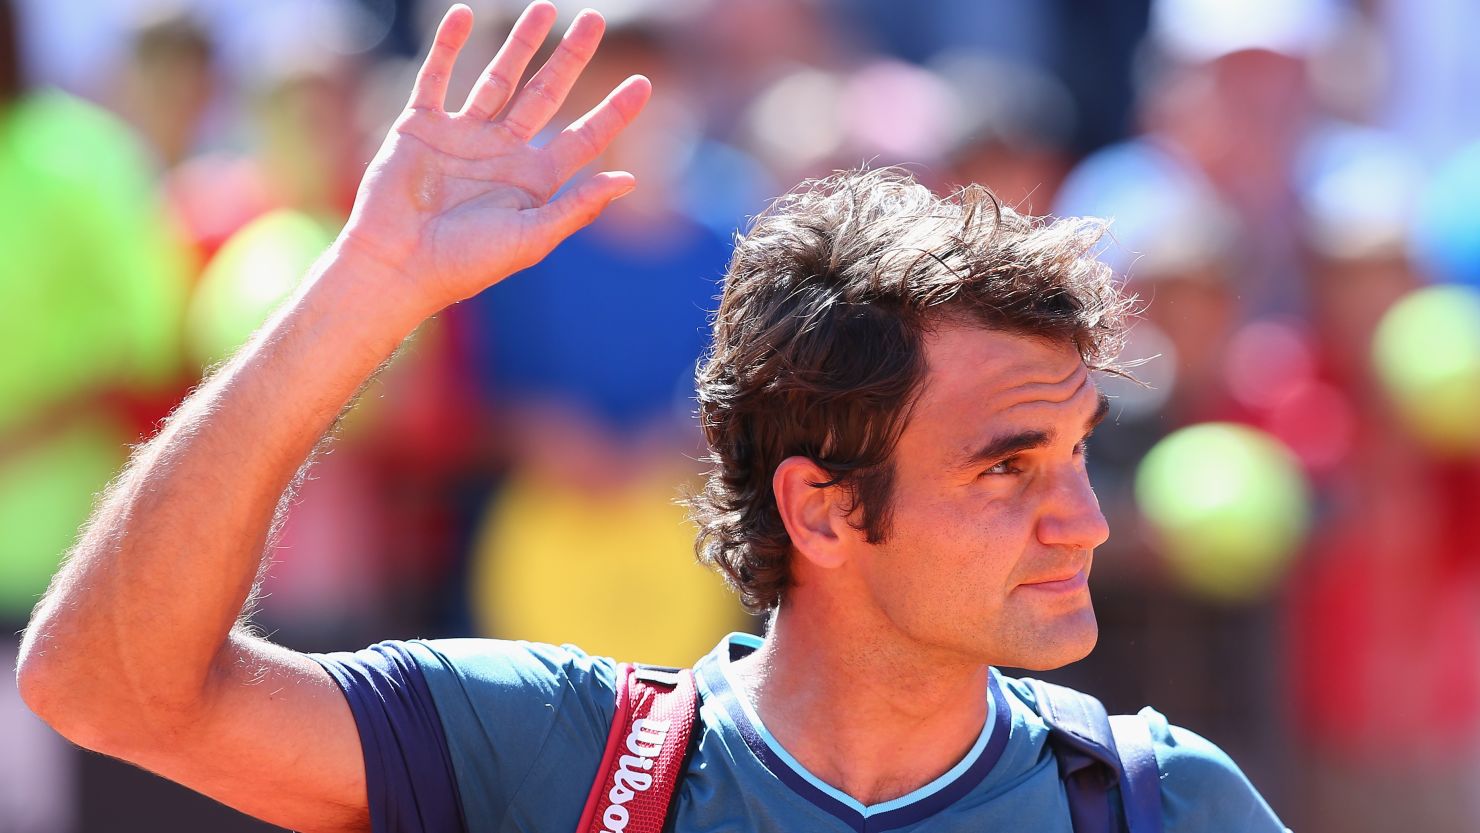 It's goodbye for Roger Federer as he loses in the second round of the Rome Masters to Jeremy Chardy.